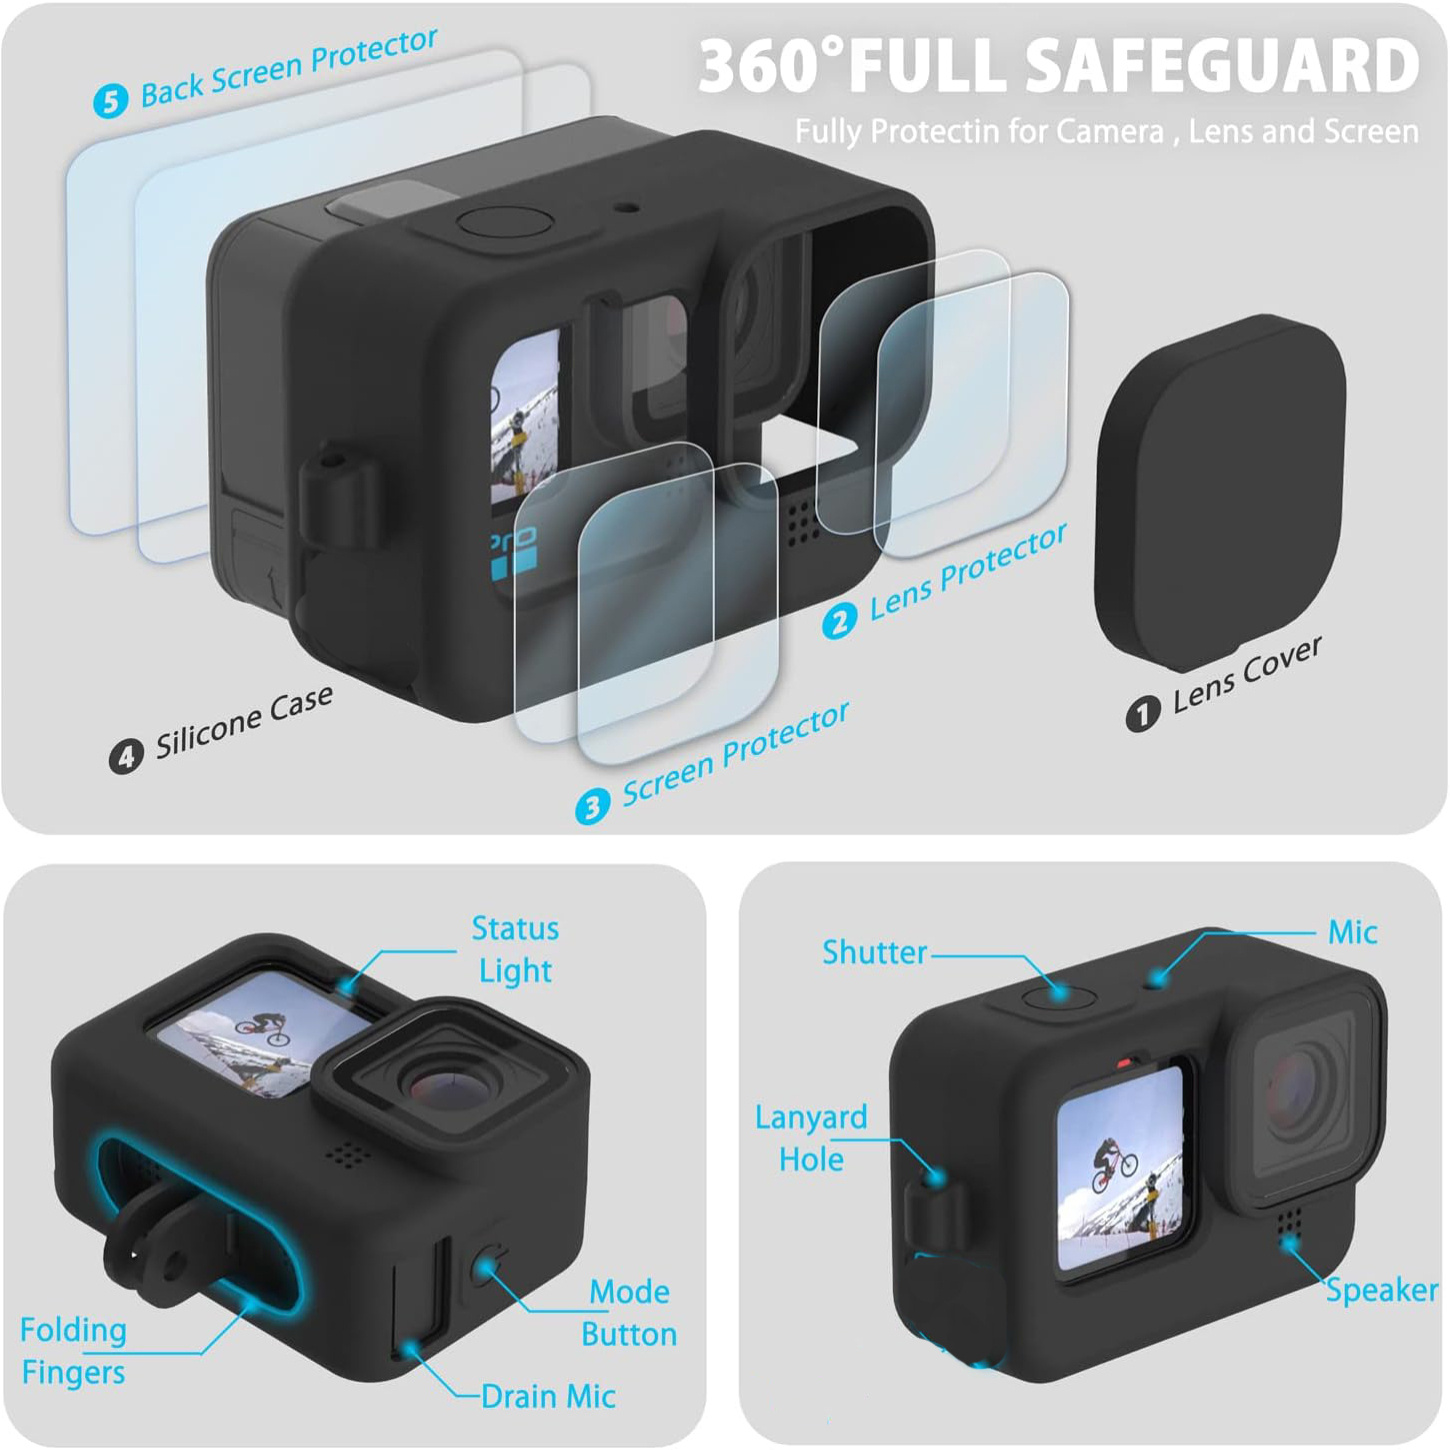 Silicone Protective Case for GoPro Hero 9 / 10 / 11 / 12